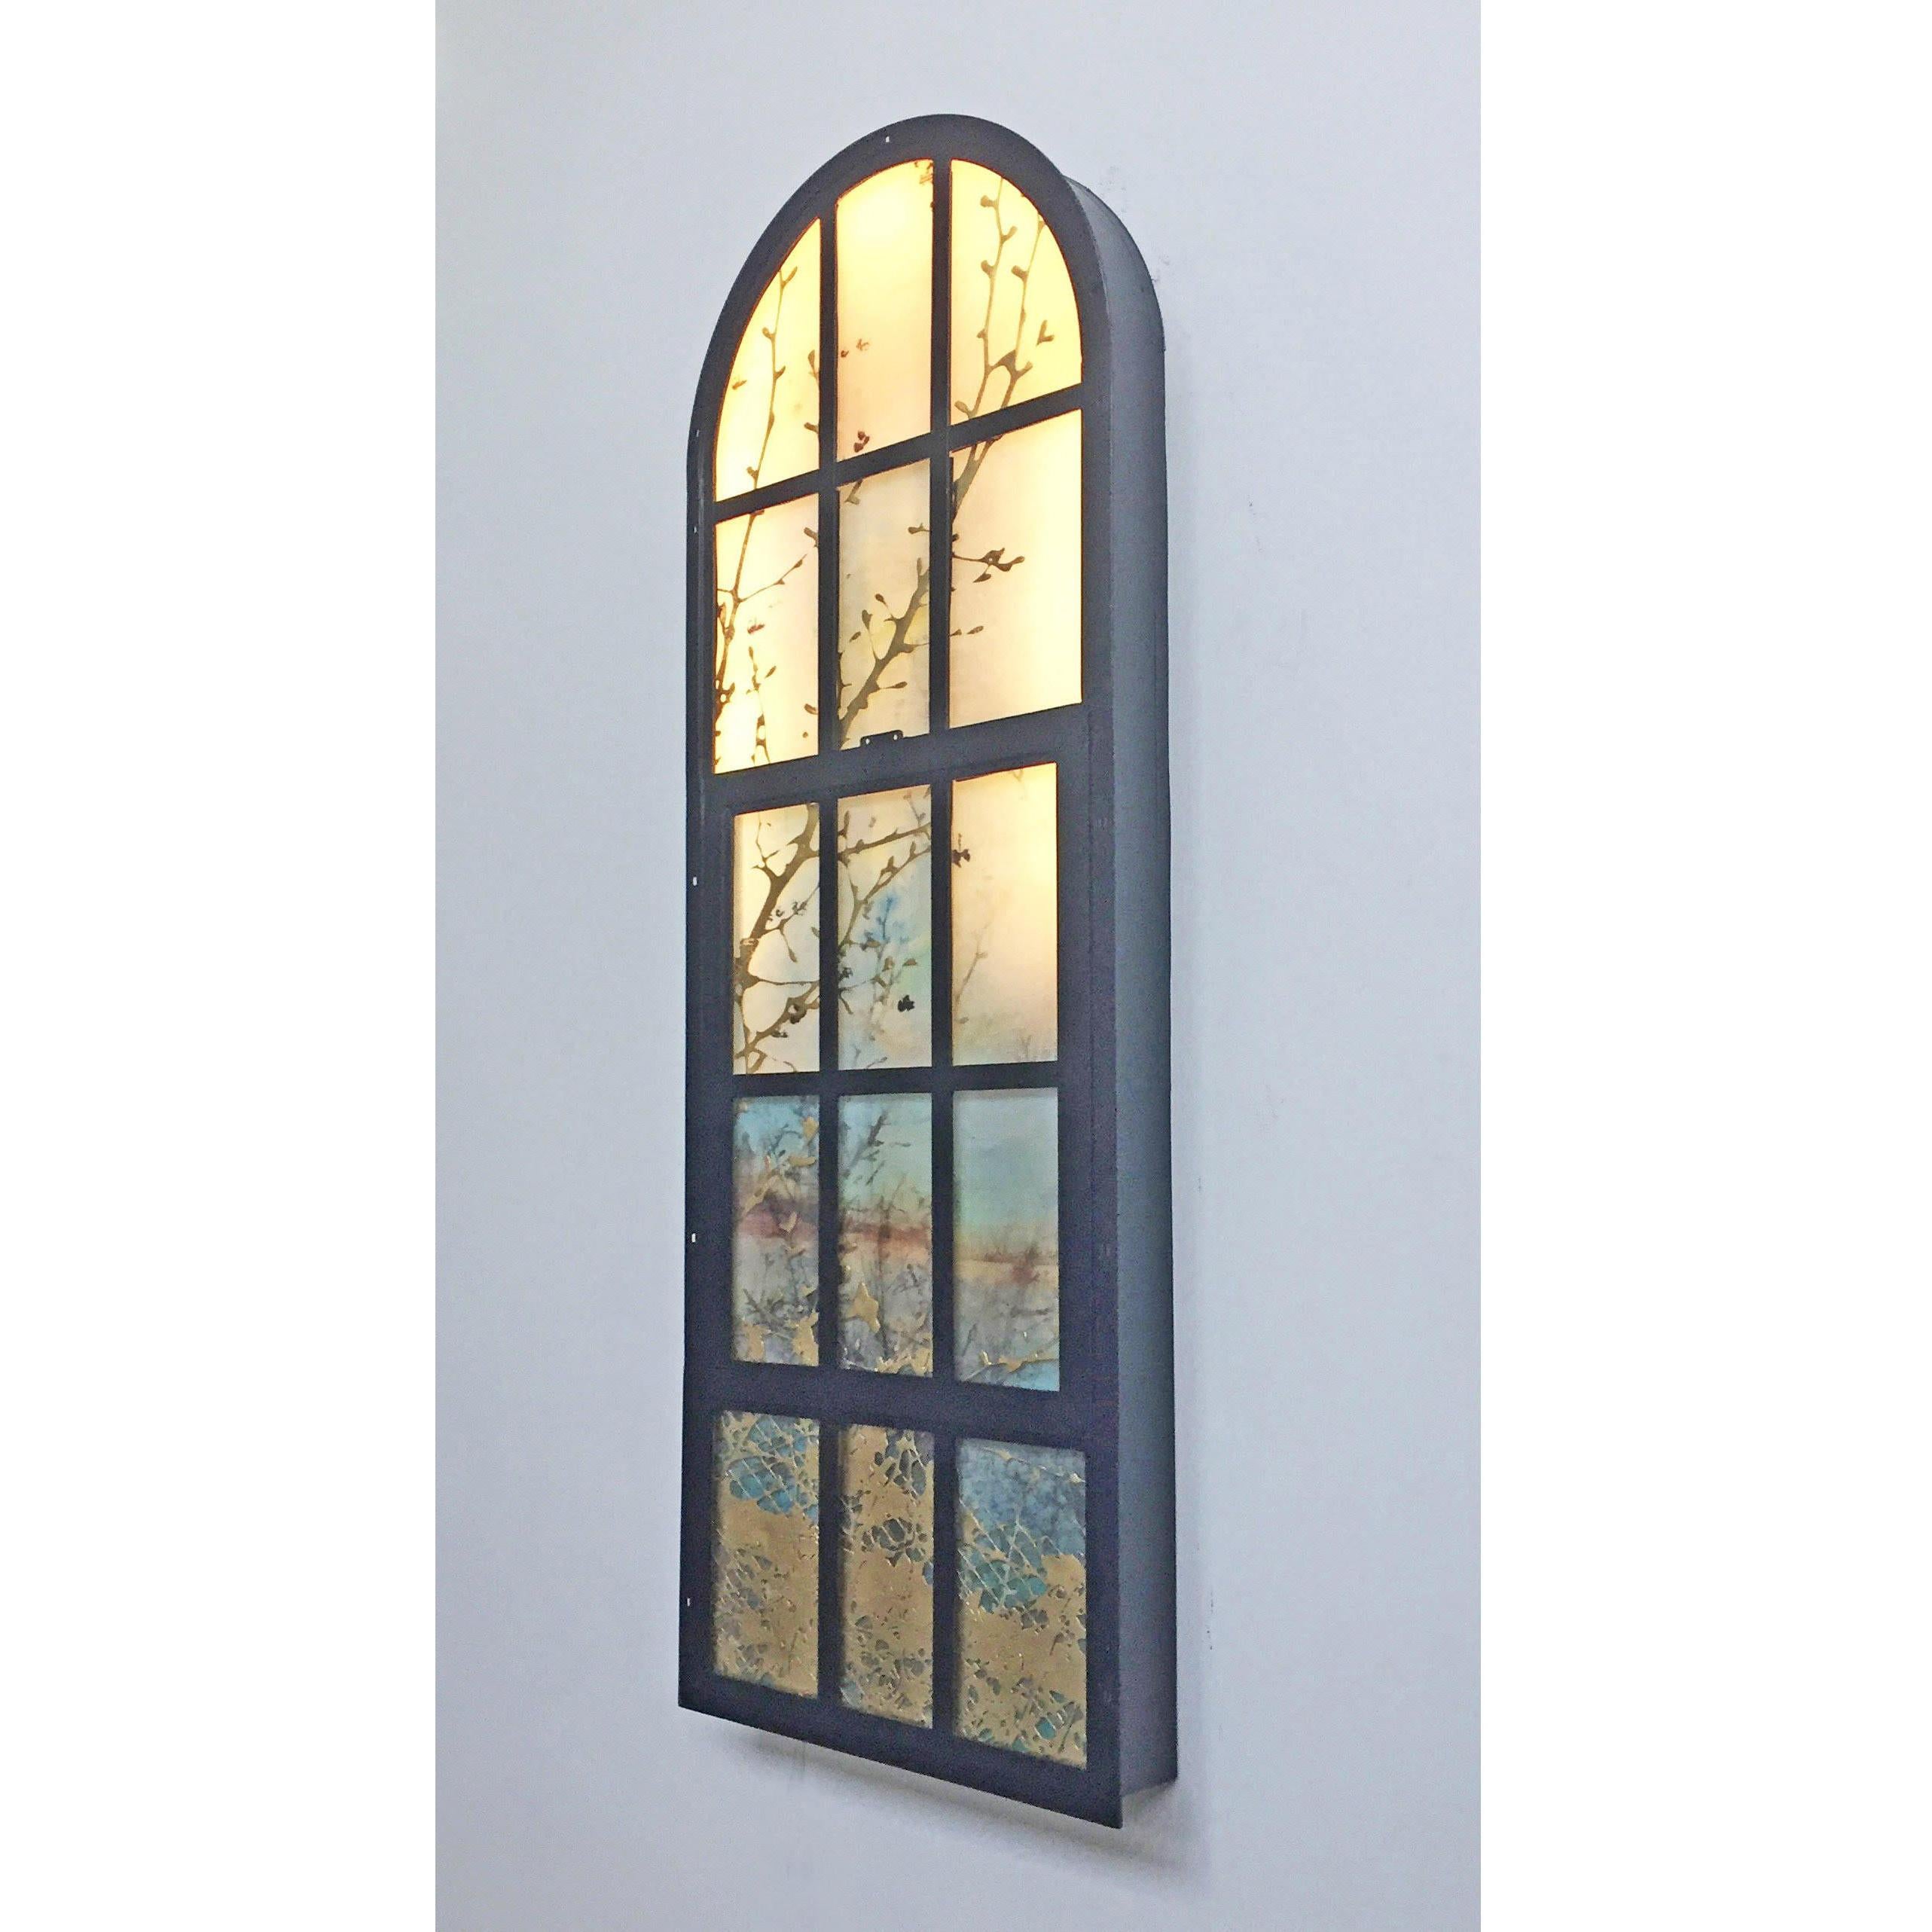 Saltwater Window, mixed media, 55 x 35 inches. Glass design - Contemporary Mixed Media Art by Tracy Silva Barbosa